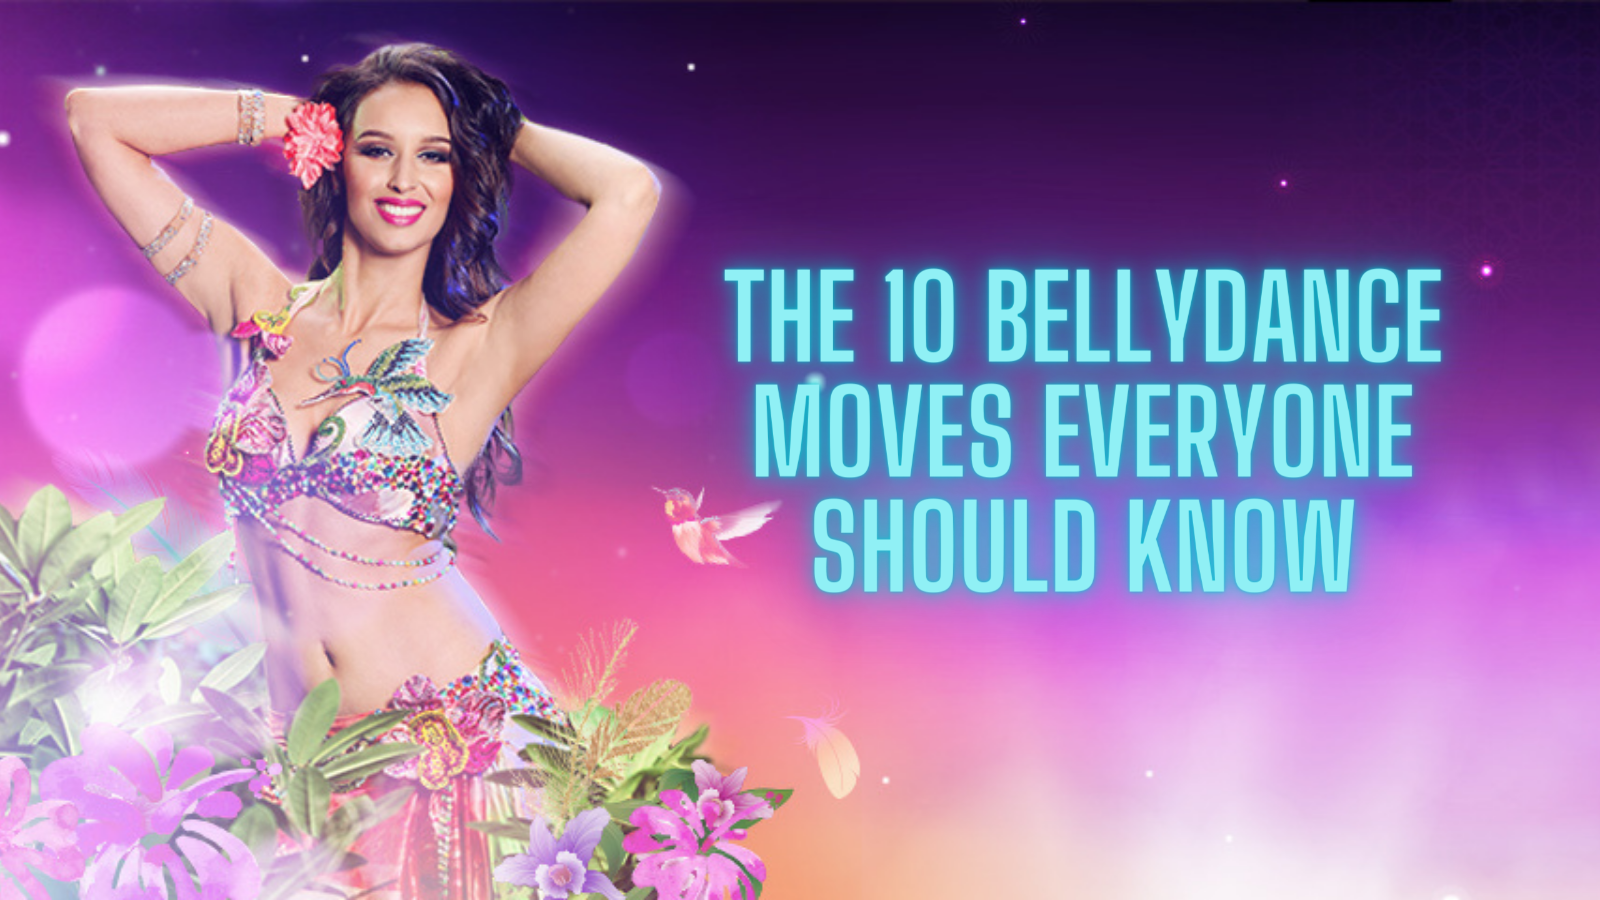 The 10 Bellydance moves everyone should know